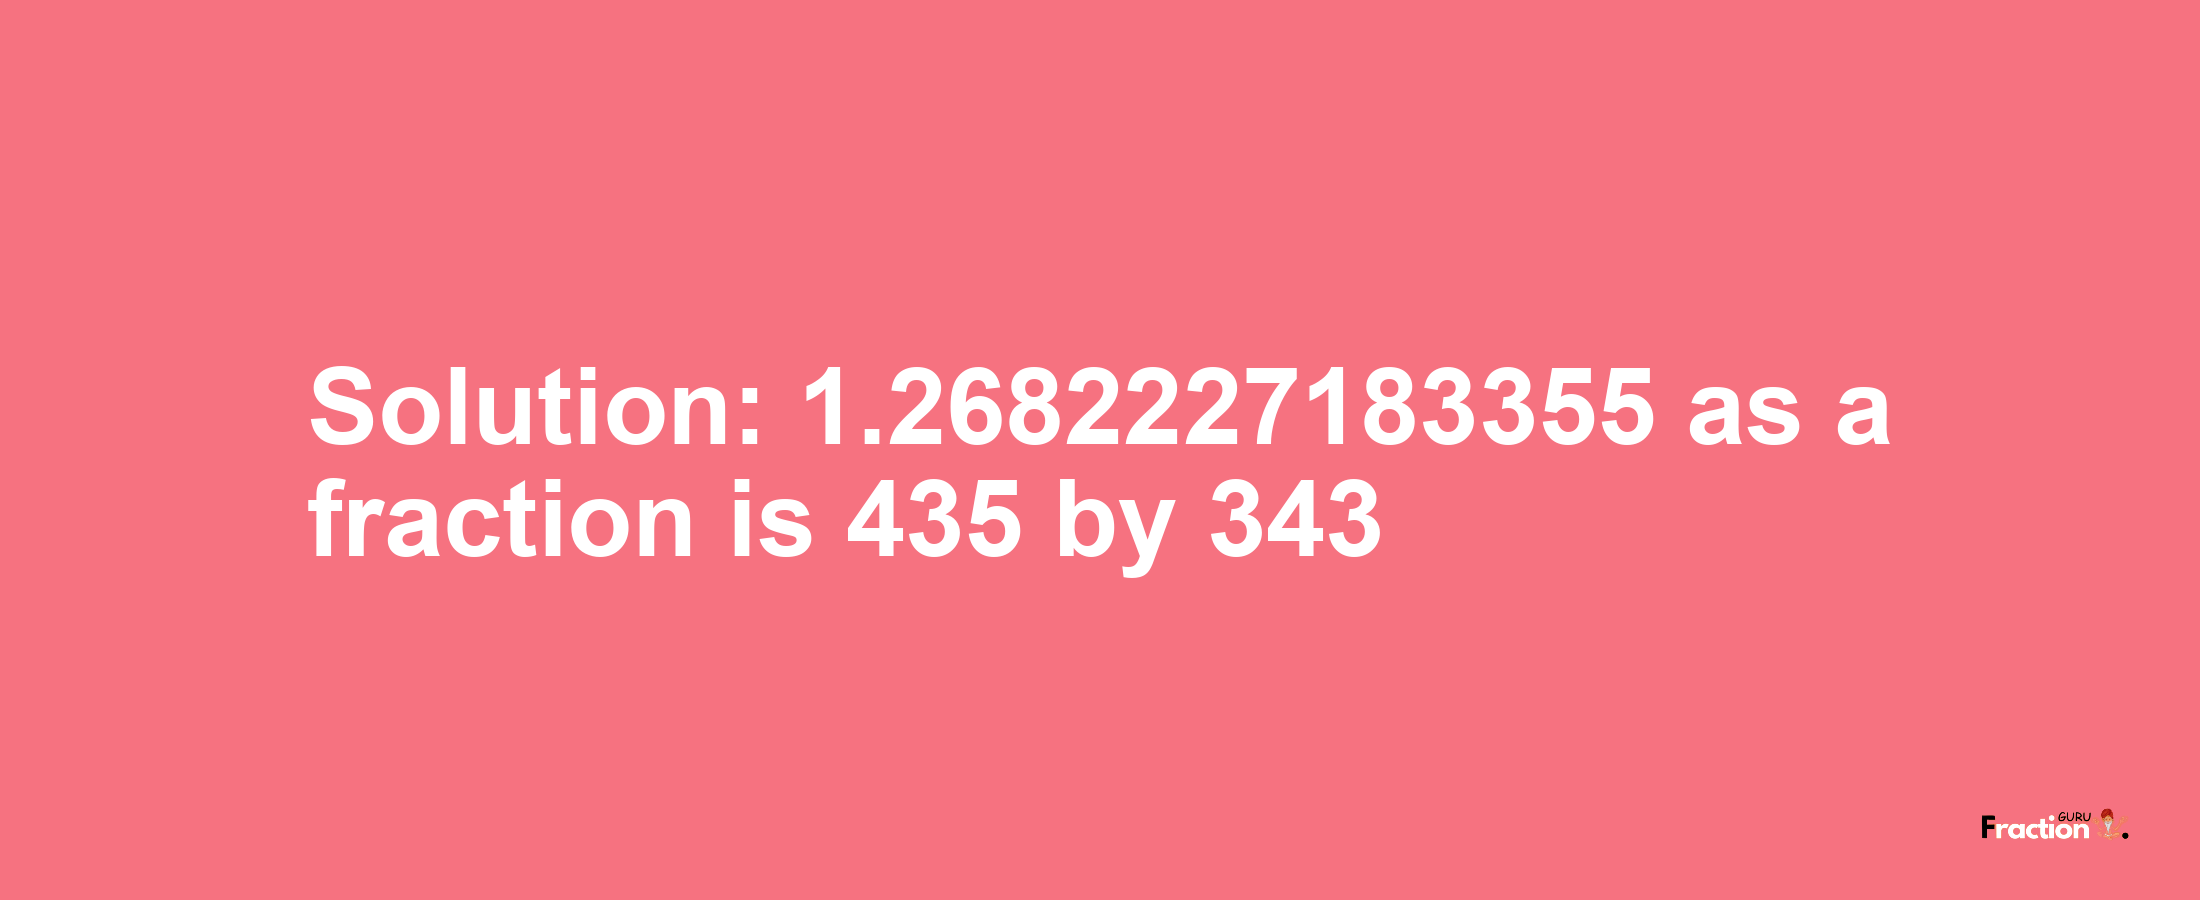 Solution:1.2682227183355 as a fraction is 435/343